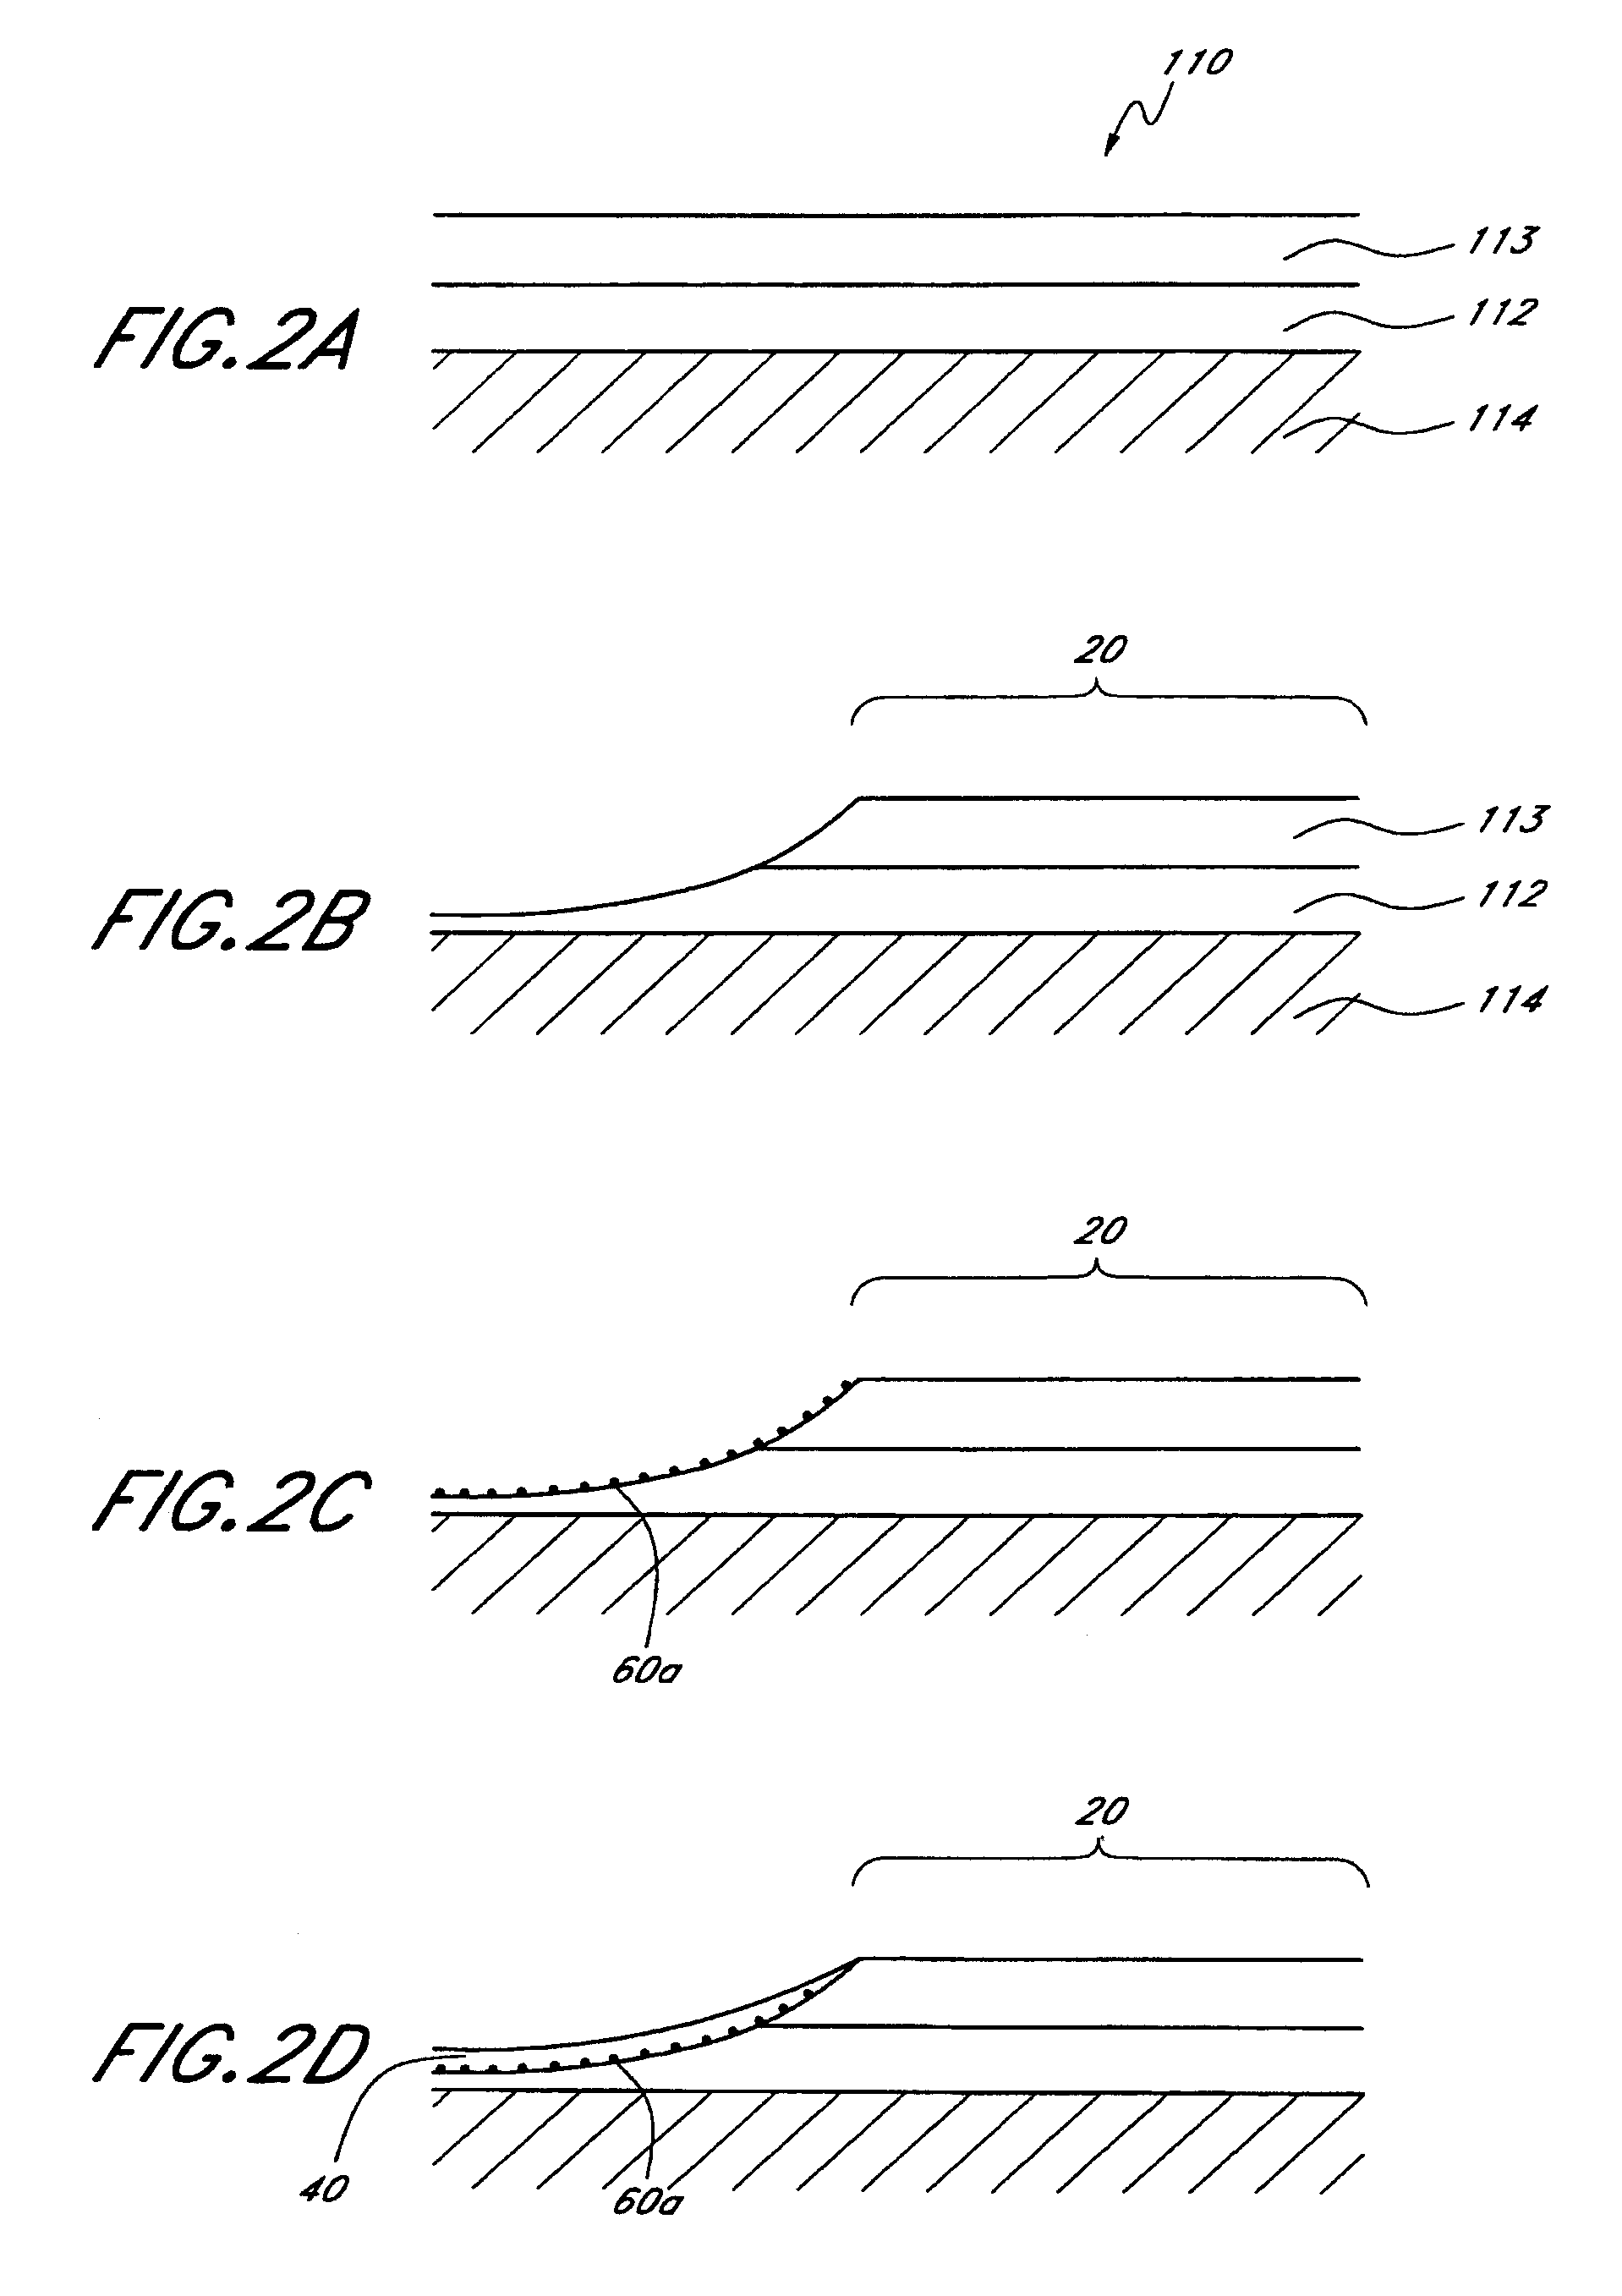 Method for fabricating magnetoresistive read head having a bias structure with at least one dusting layer